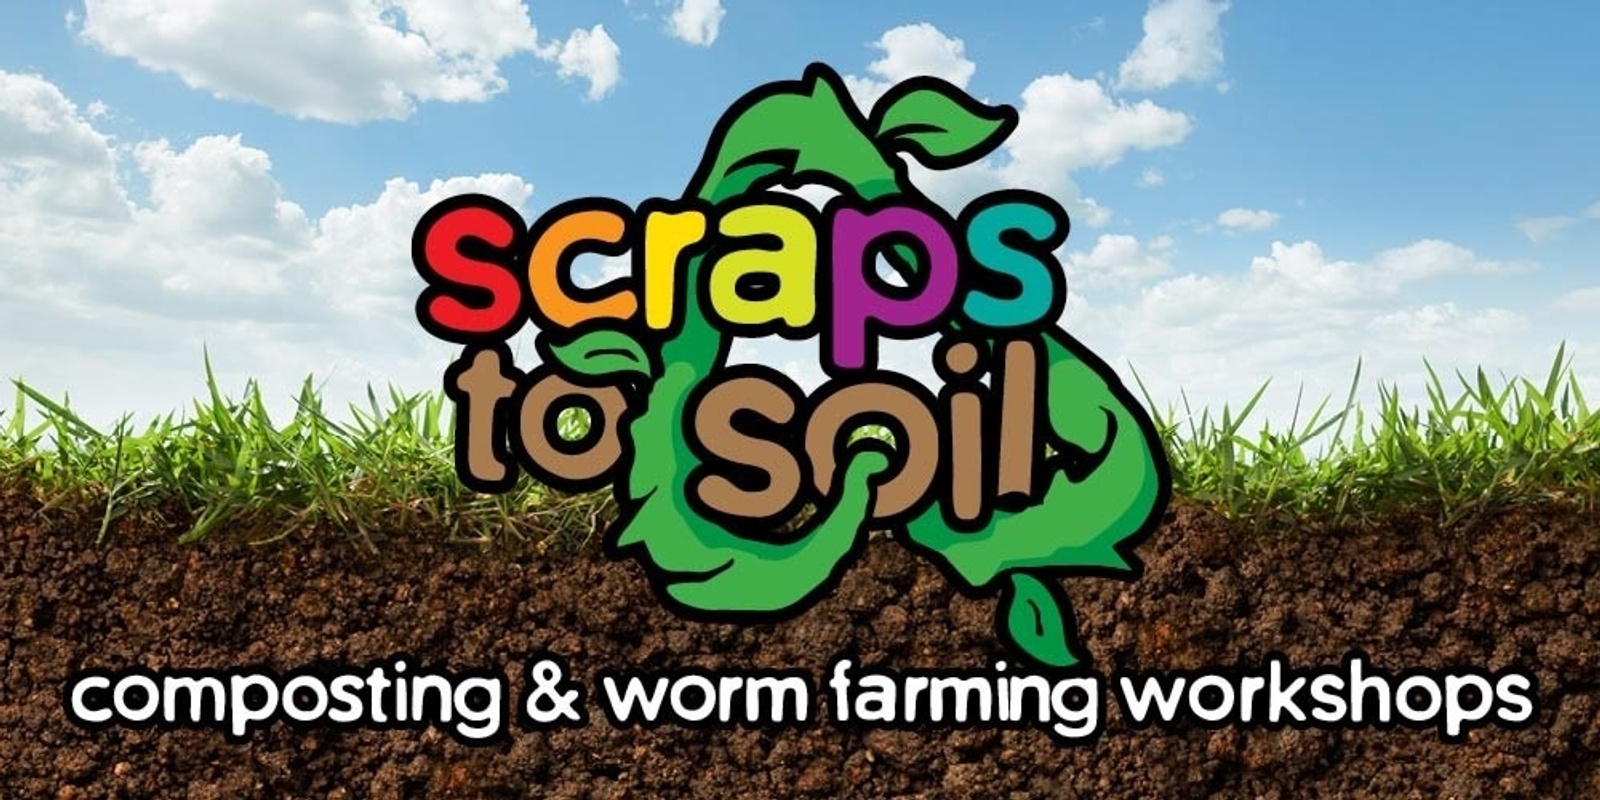 Banner image for Scraps to Soil Composting Workshop - Douglas Vale Winery and Garden, Port Macquarie